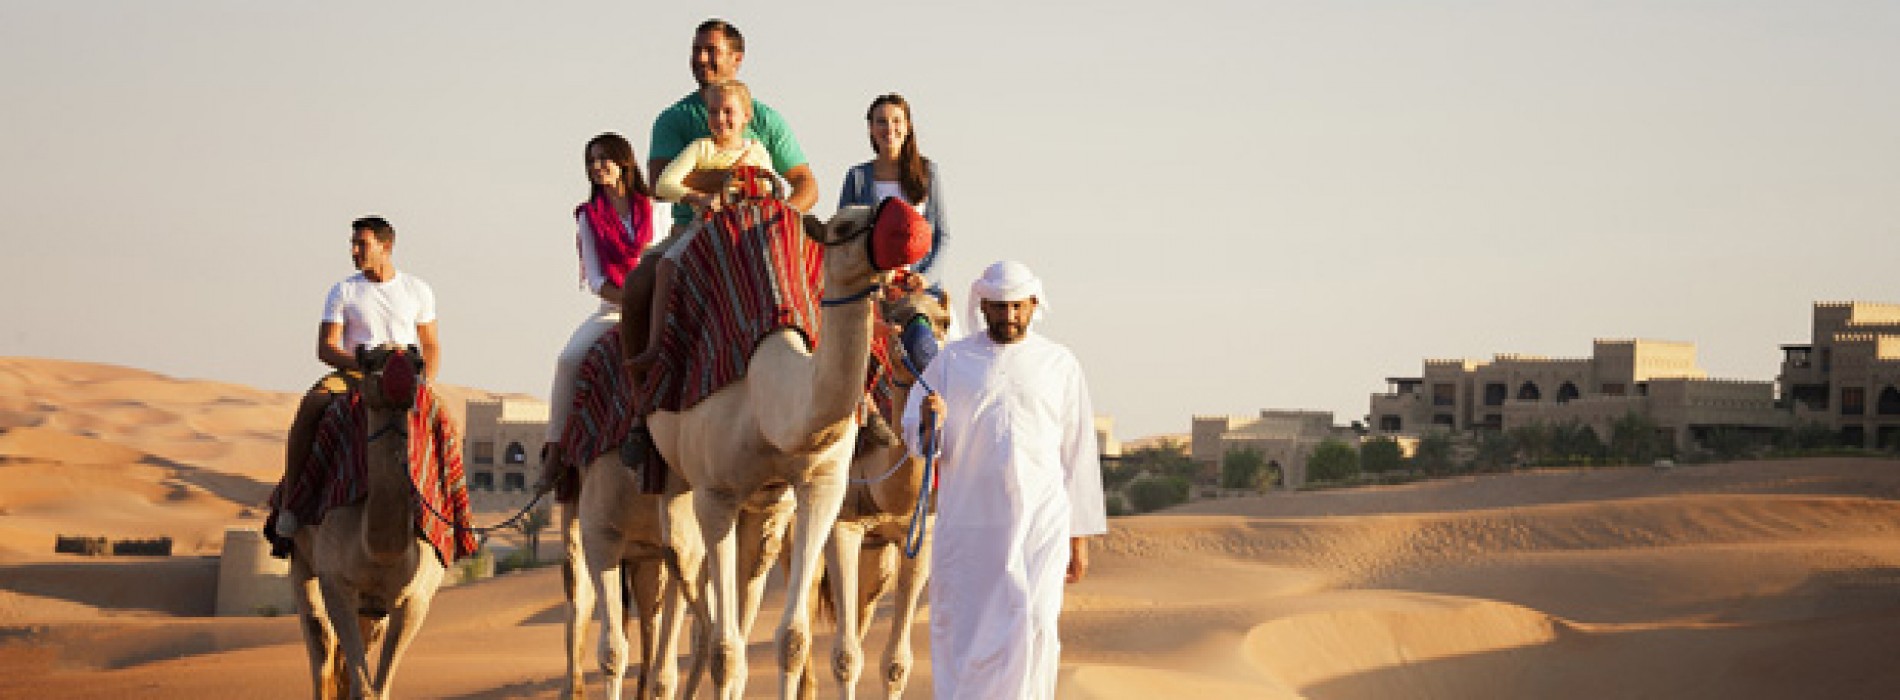 UAE exempts visa fee for children of tourists under the age of 18